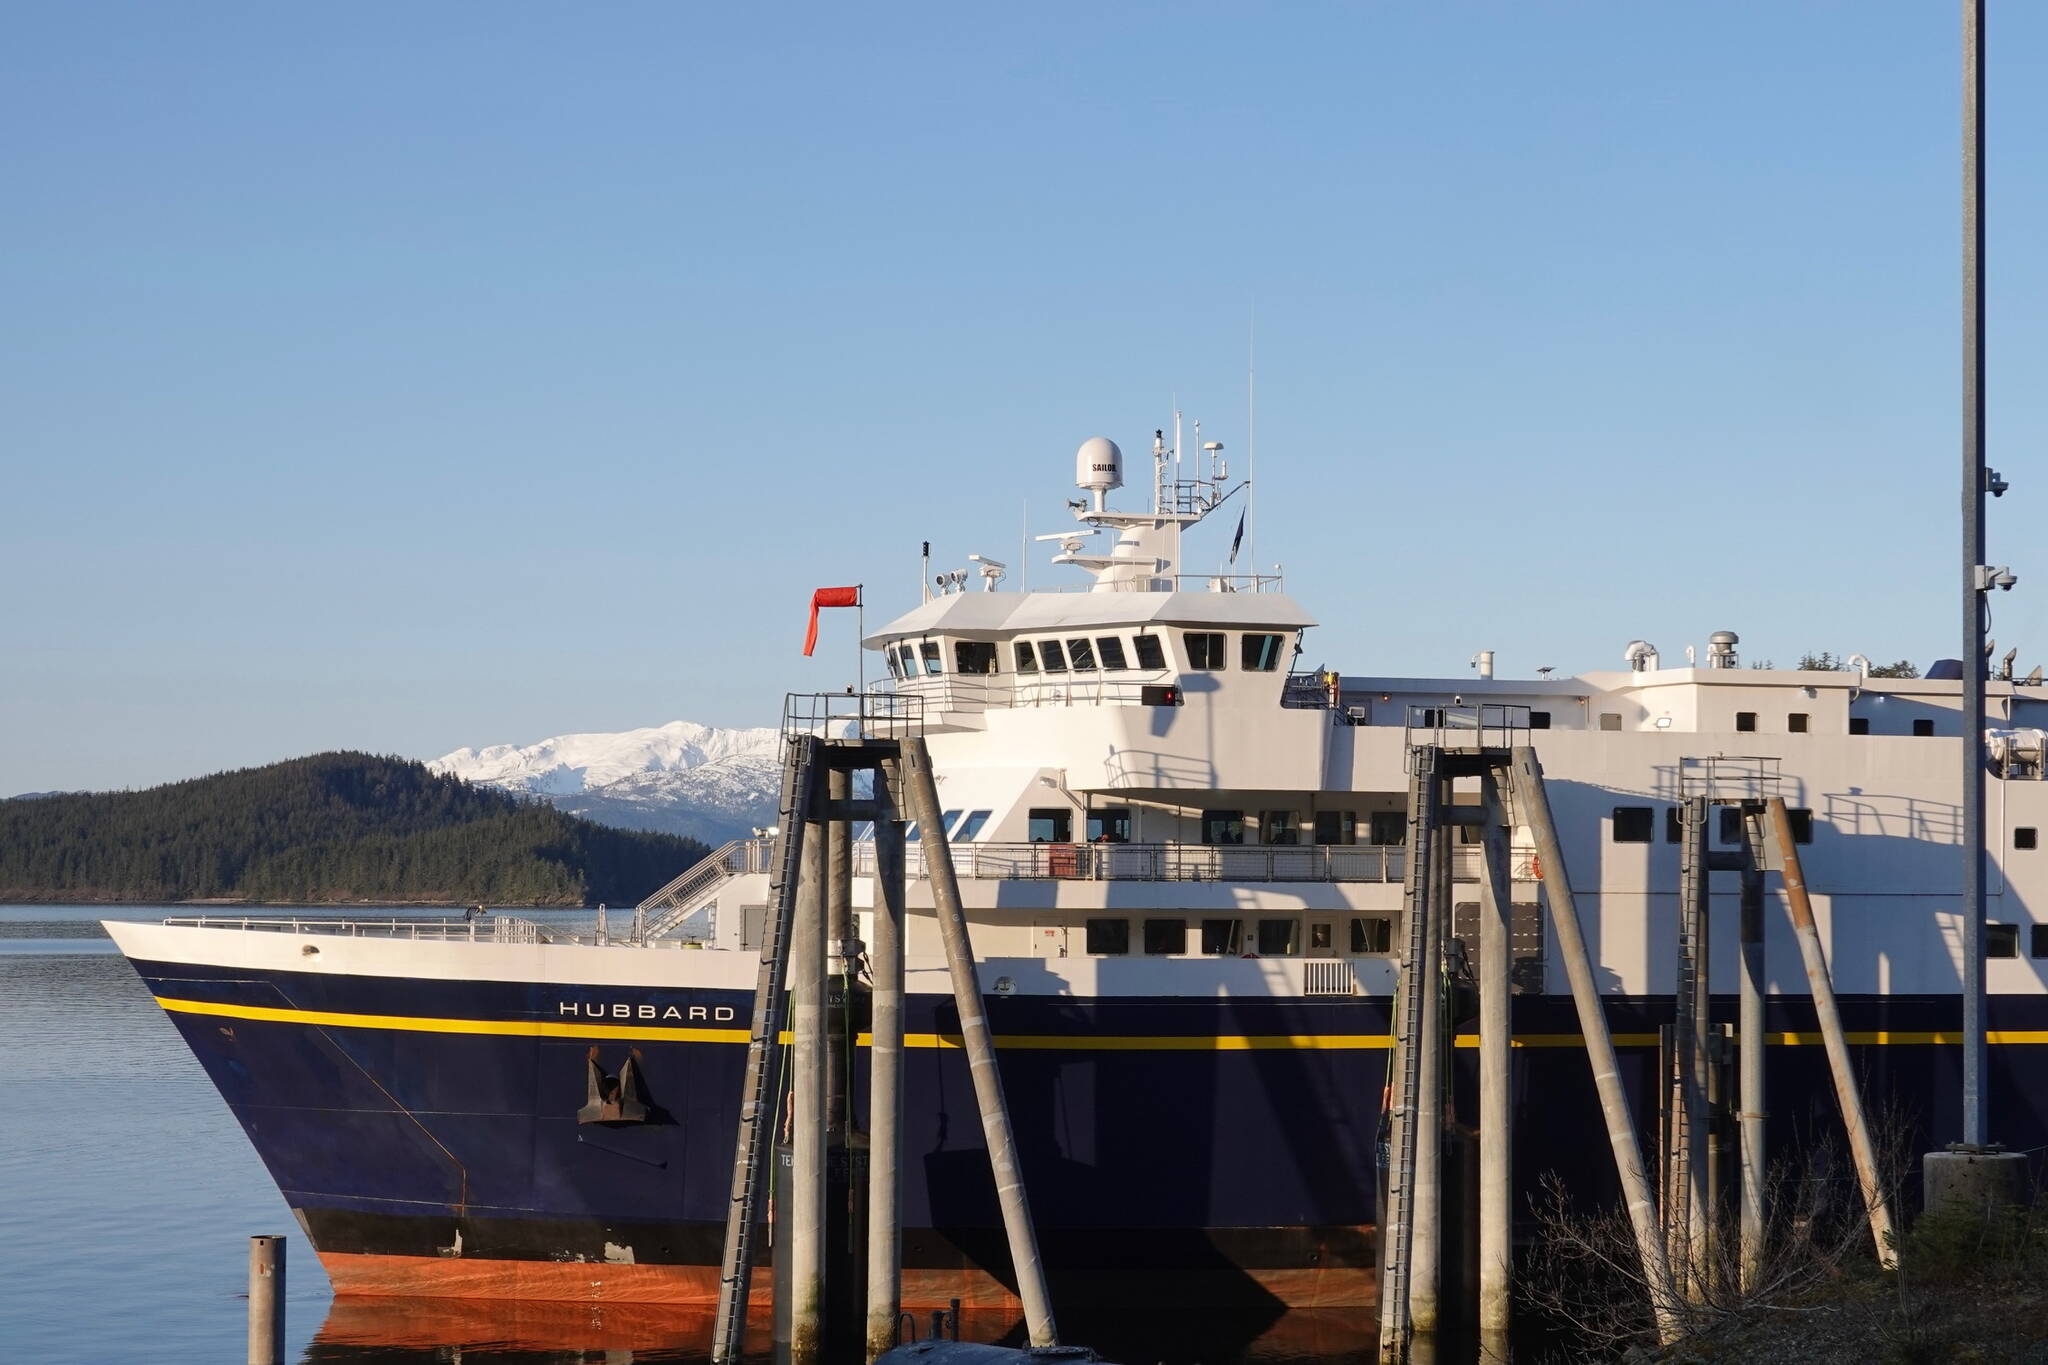 The Hubbard, the newest vessel in the Alaska Marine Highway System fleet, docks at the Auke Bay Ferry Terminal on April 16. It is generally scheduled to provide dayboat service between Juneau, Haines and Skagway. (Photo by Laurie Craig)